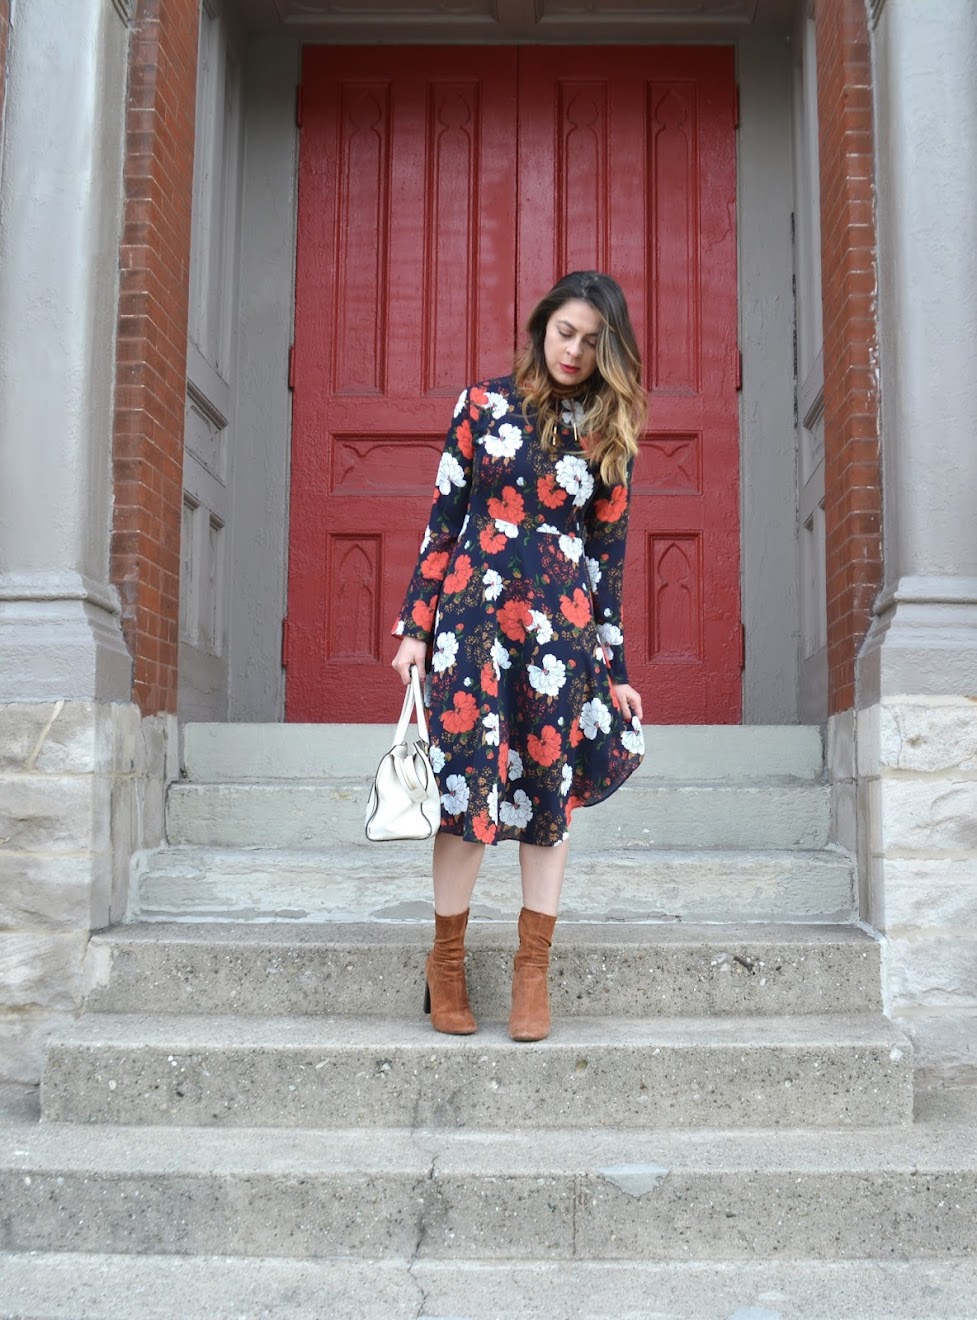 Red Floral-print Crew Neck A-line Long Sleeve Midi Dress, JIANSHAN, StyleWe Crew Neck A-line Long Sleeve Midi Dress, Red Floral-print Crew Neck A-line Long Sleeve Midi Dress, StyleWeRed Floral-print Crew Neck A-line Long Sleeve Midi Dress, StyleWe foral midi dress, vestido midi de StyleWe, vestido midi floral, winter florals, dark florals, estampado floral para el invierno, retro winter florals, StyleWe, Desiree Velasquez, Fashionlingual, Chicago fashion blogger, Chicago style blogger, Chicago streetstyle, Chicago blogger, bloguera de moda de Chicago, bloguera de moda, bloguera de moda latina, Latina fashion blogger, Zara suede midi boots, suede midi boots, brown suede midi boots, botines de ante de Zara, botines de Zara, botines midi, Coach Legacy satchel, white Legacy satchel from Coach, winter style, winter fashion, estilo invierno, moda del invierno, suede choker, Zaful suede choker, Zaful choker, balayage by MixedCo Salon, 